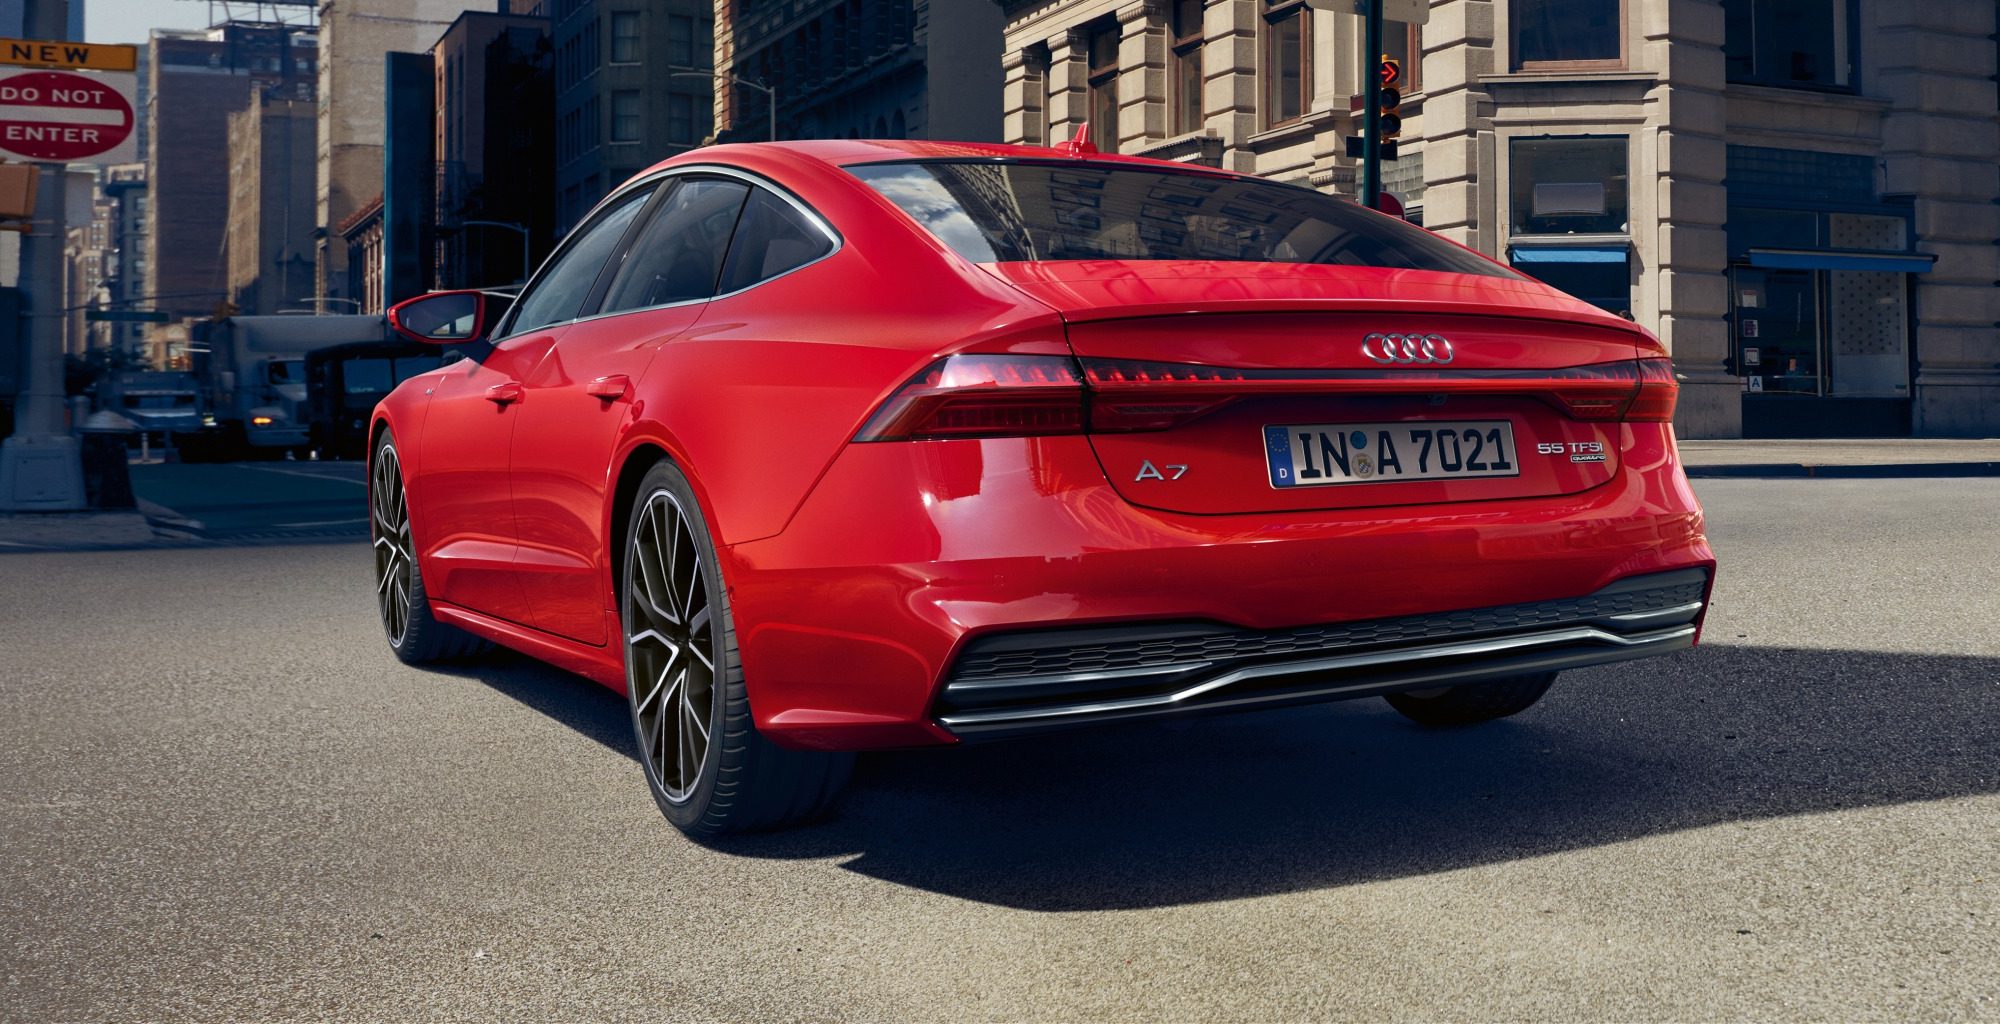 The back of a red Audi A7 Sportback in a urban setting